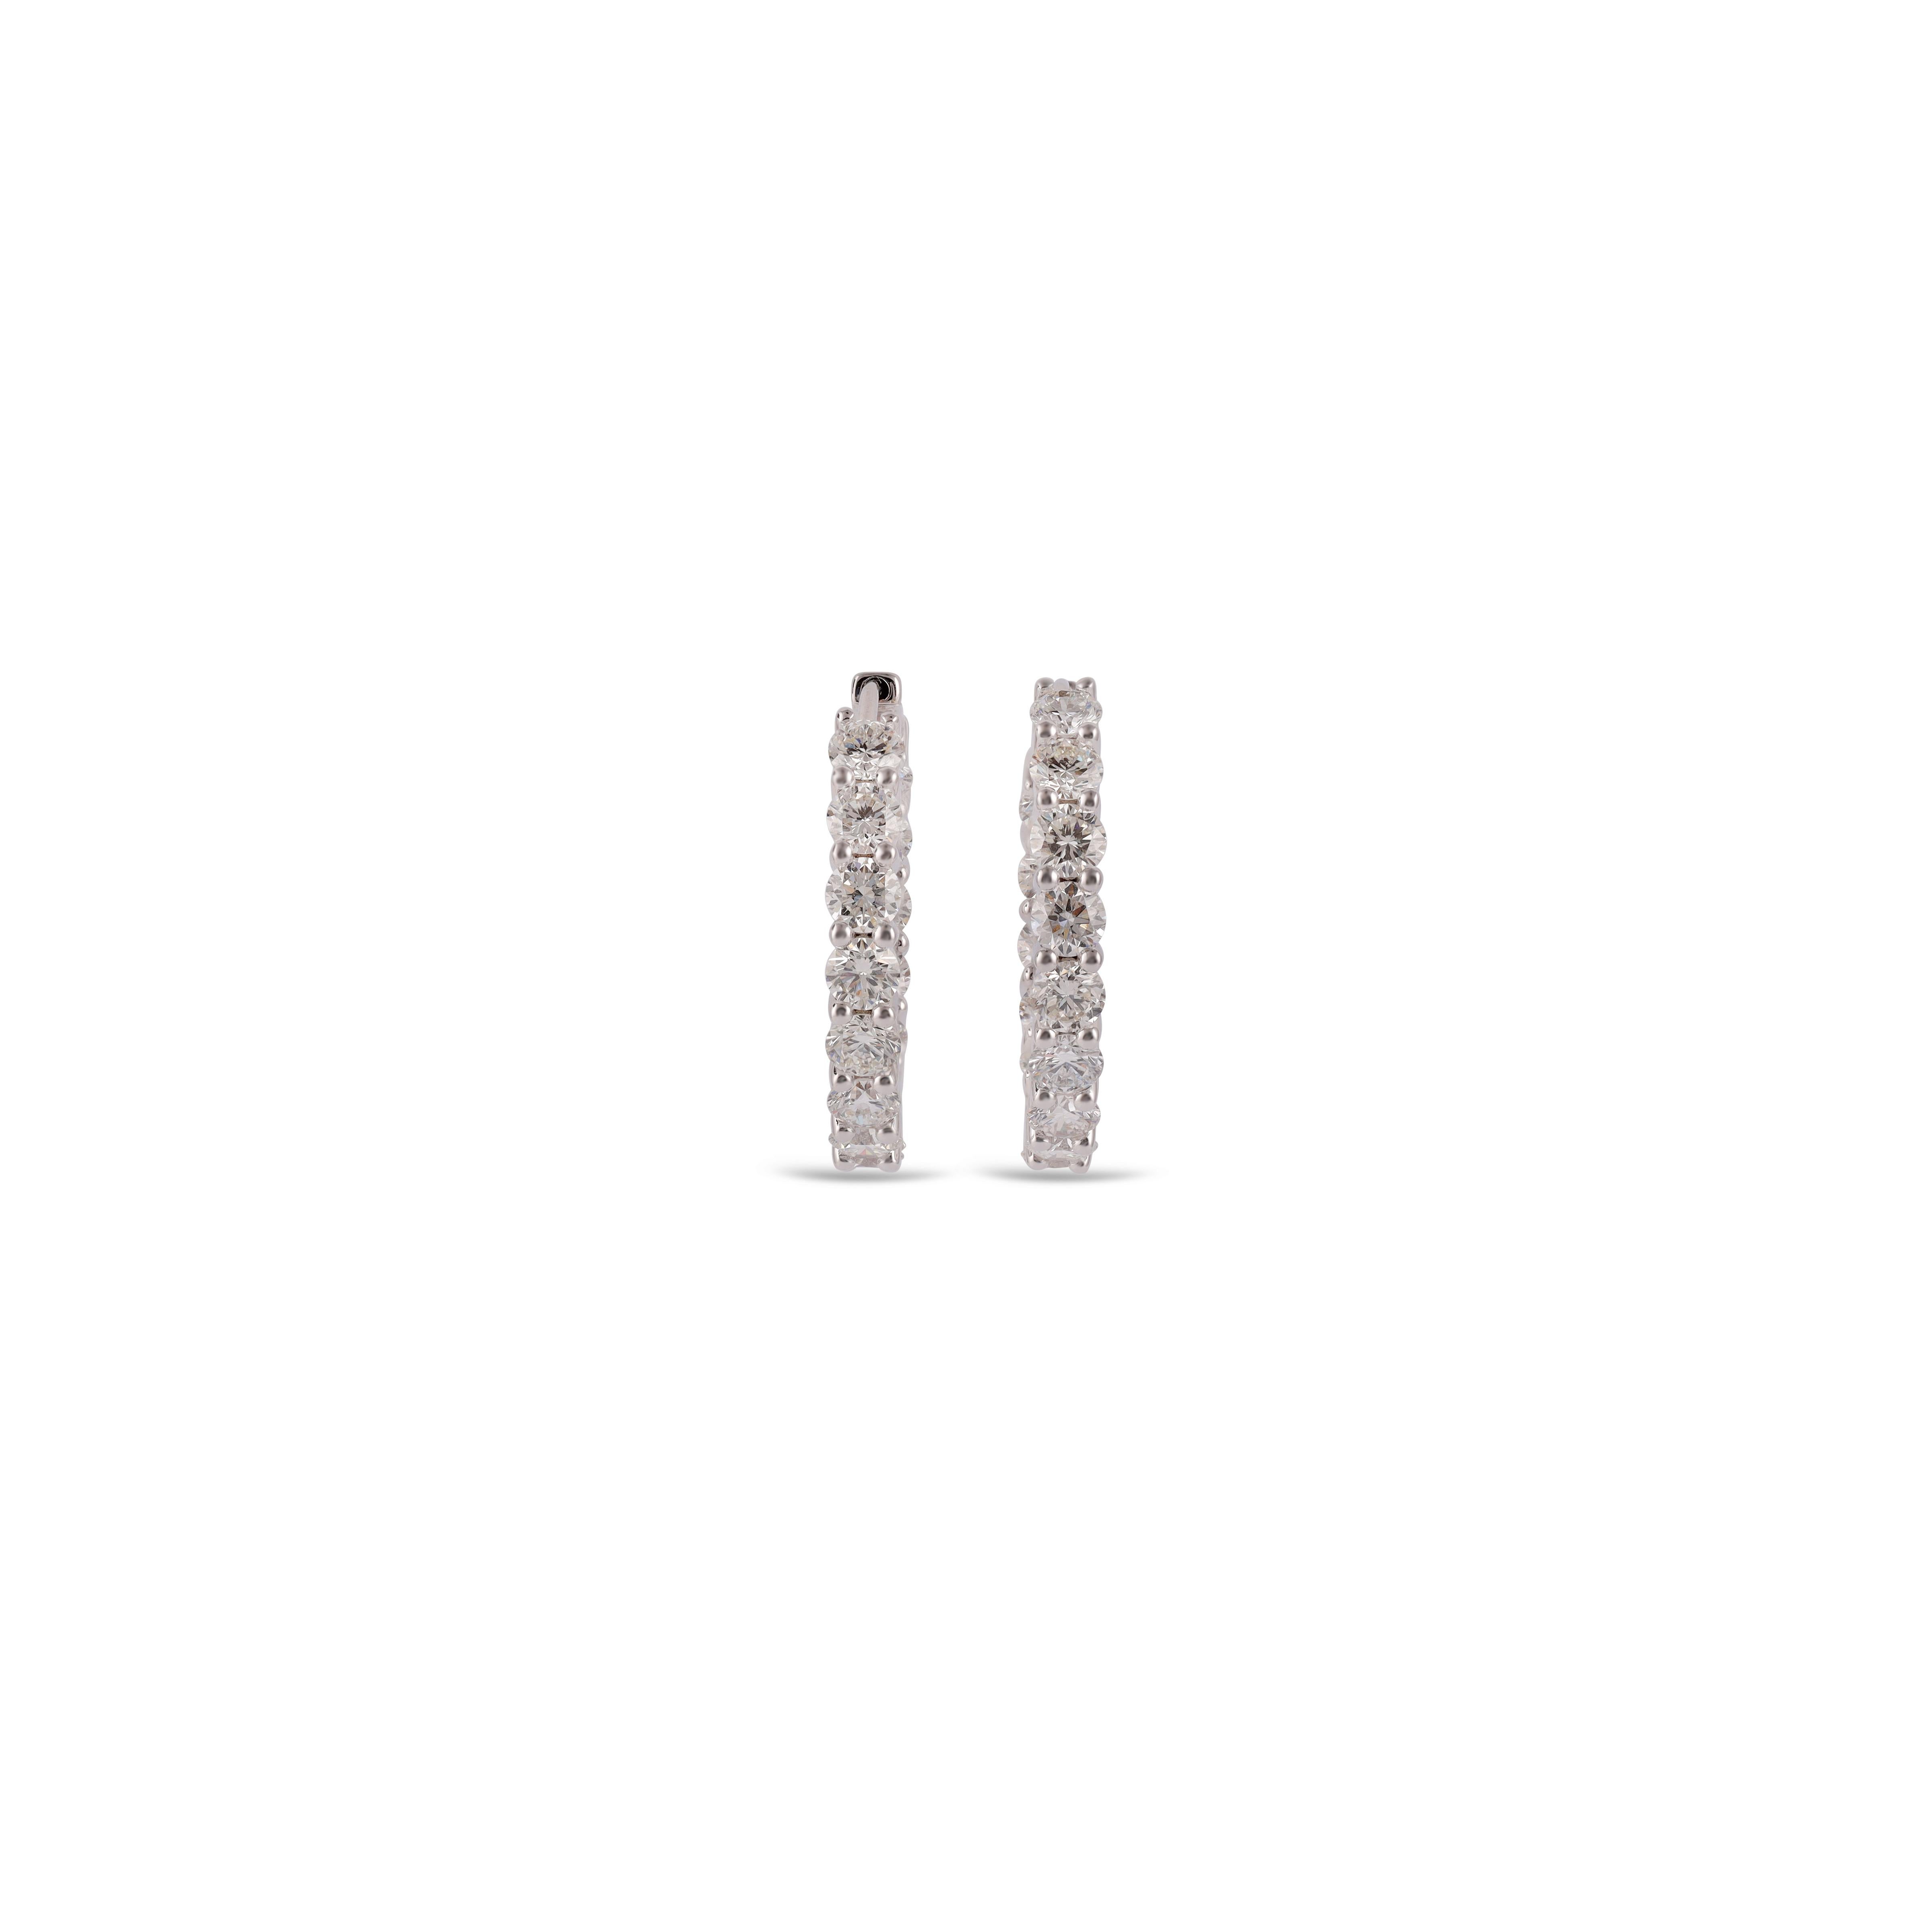 Brilliant Cut 4.58 Cts High Value Clean Diamond Hoop Earring Studded in 18 Karat White Gold For Sale